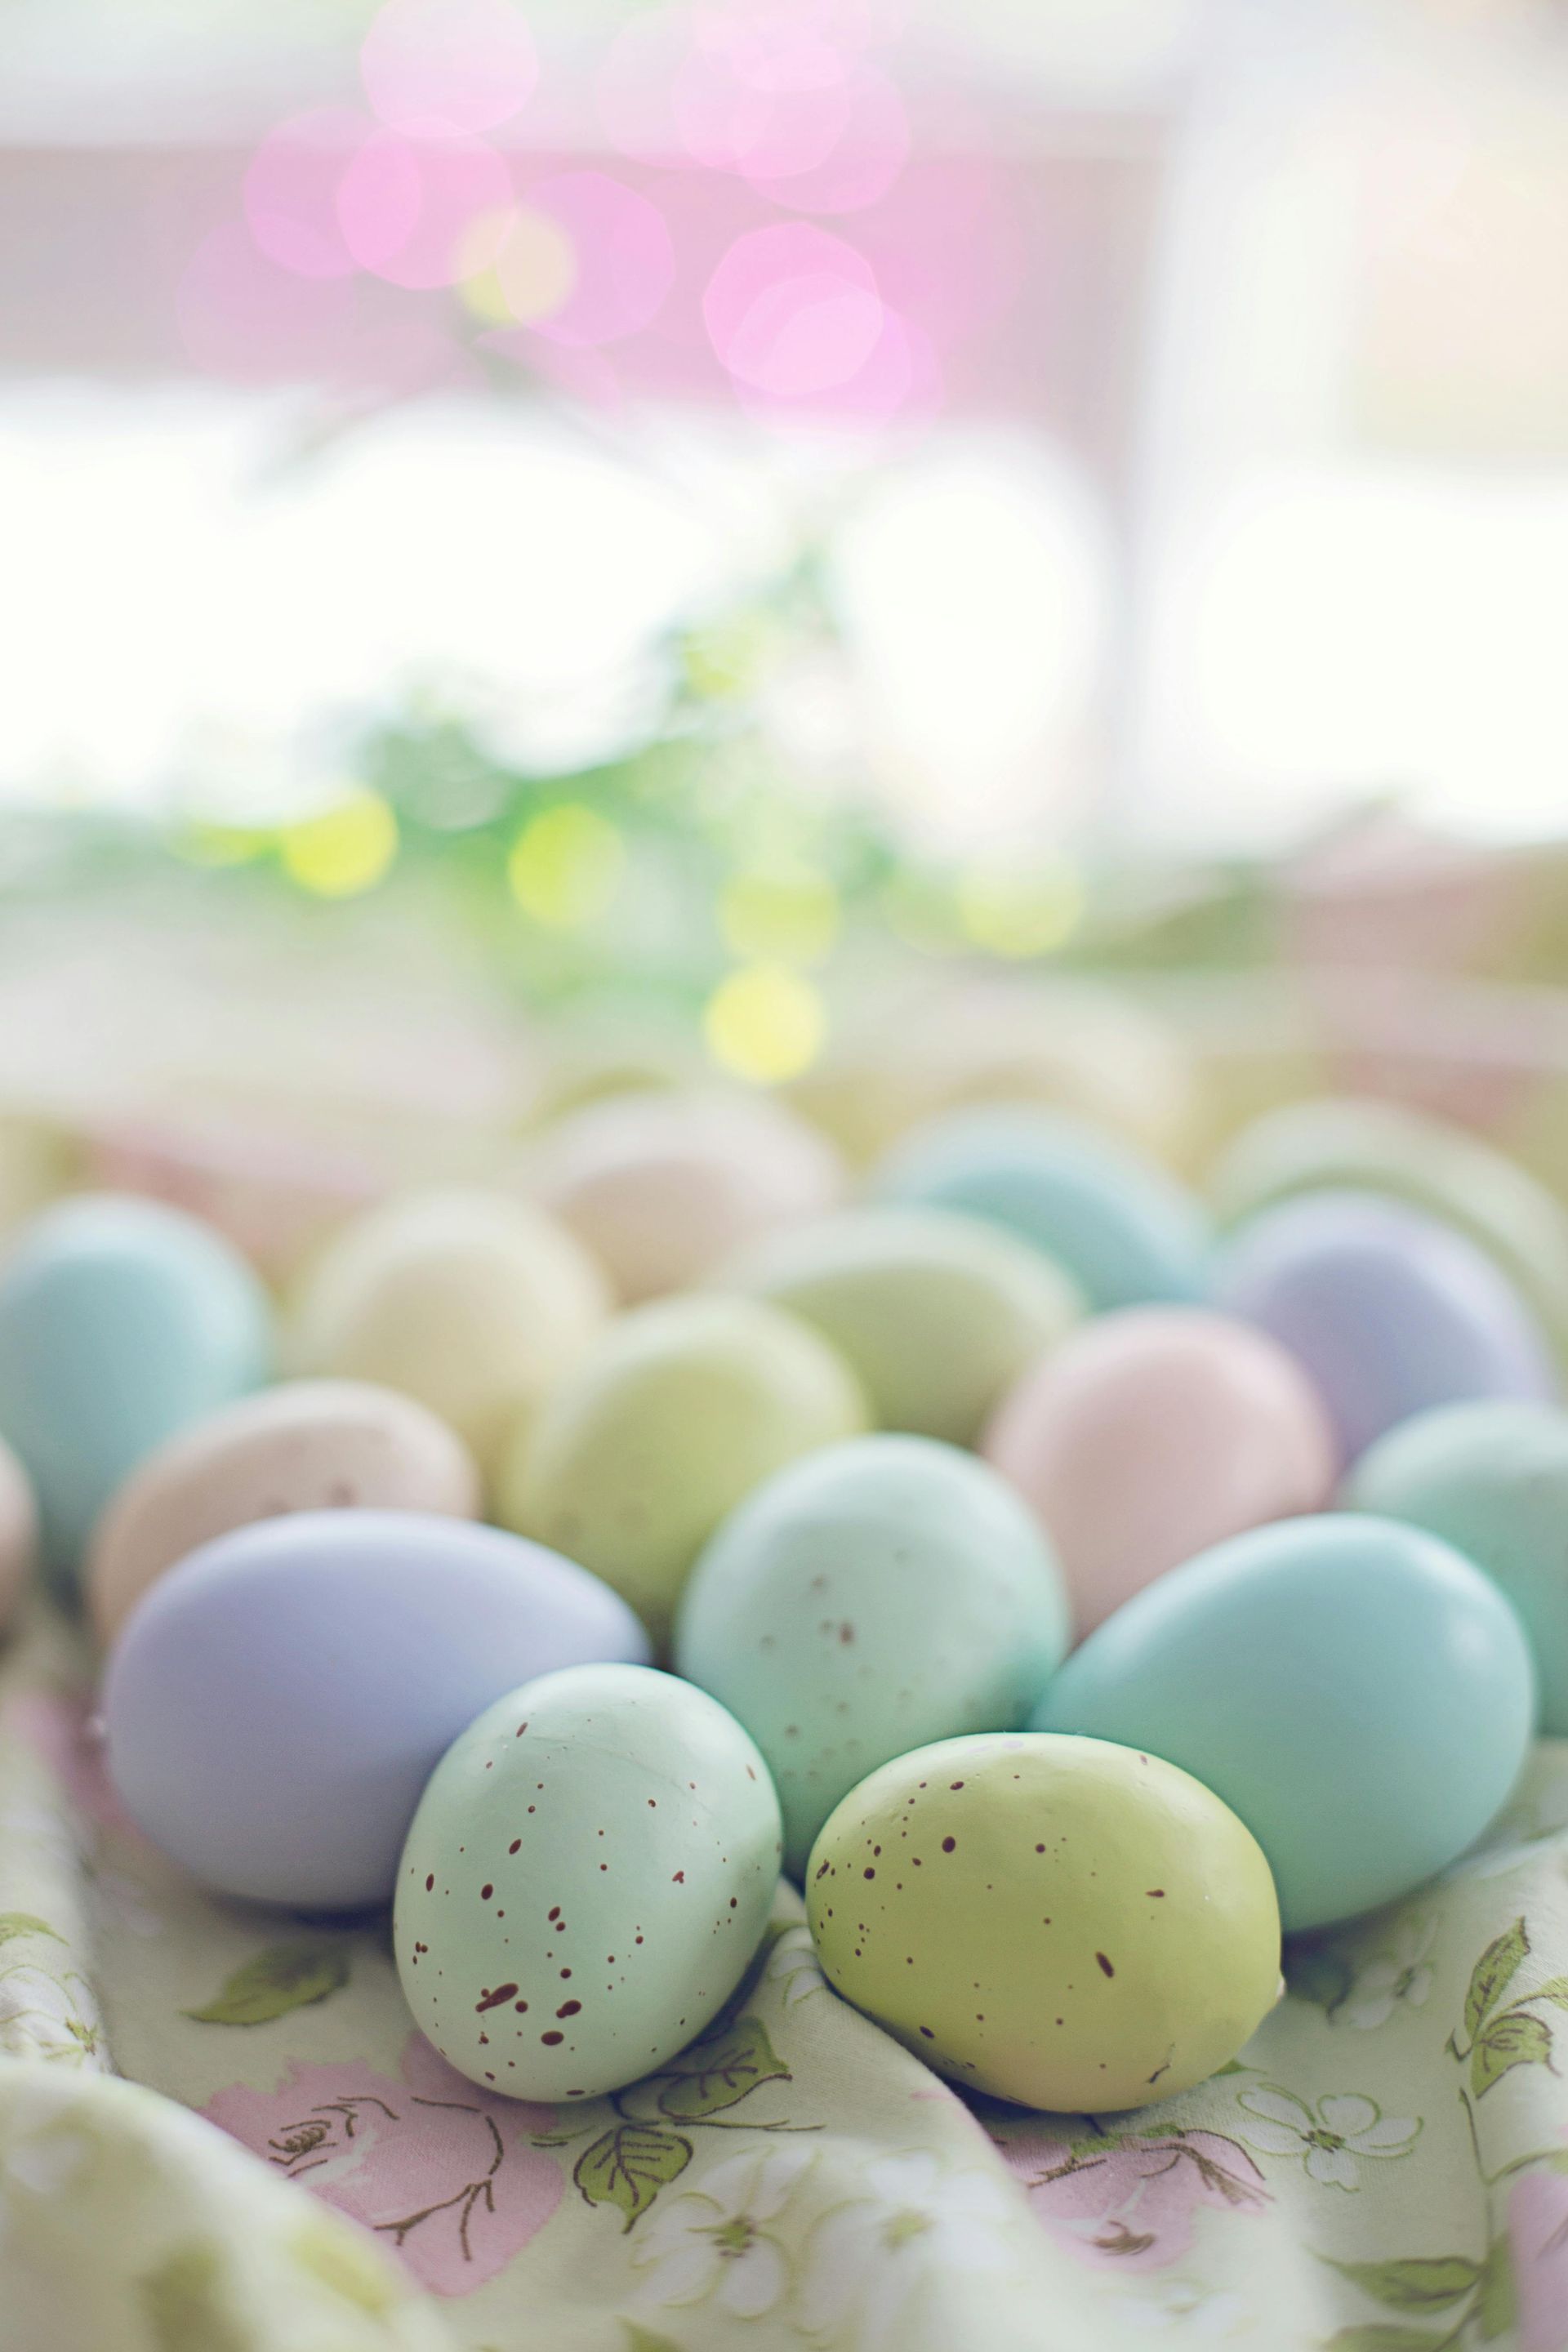 A pile of pastel coloured Easter eggs are close up to the camera.